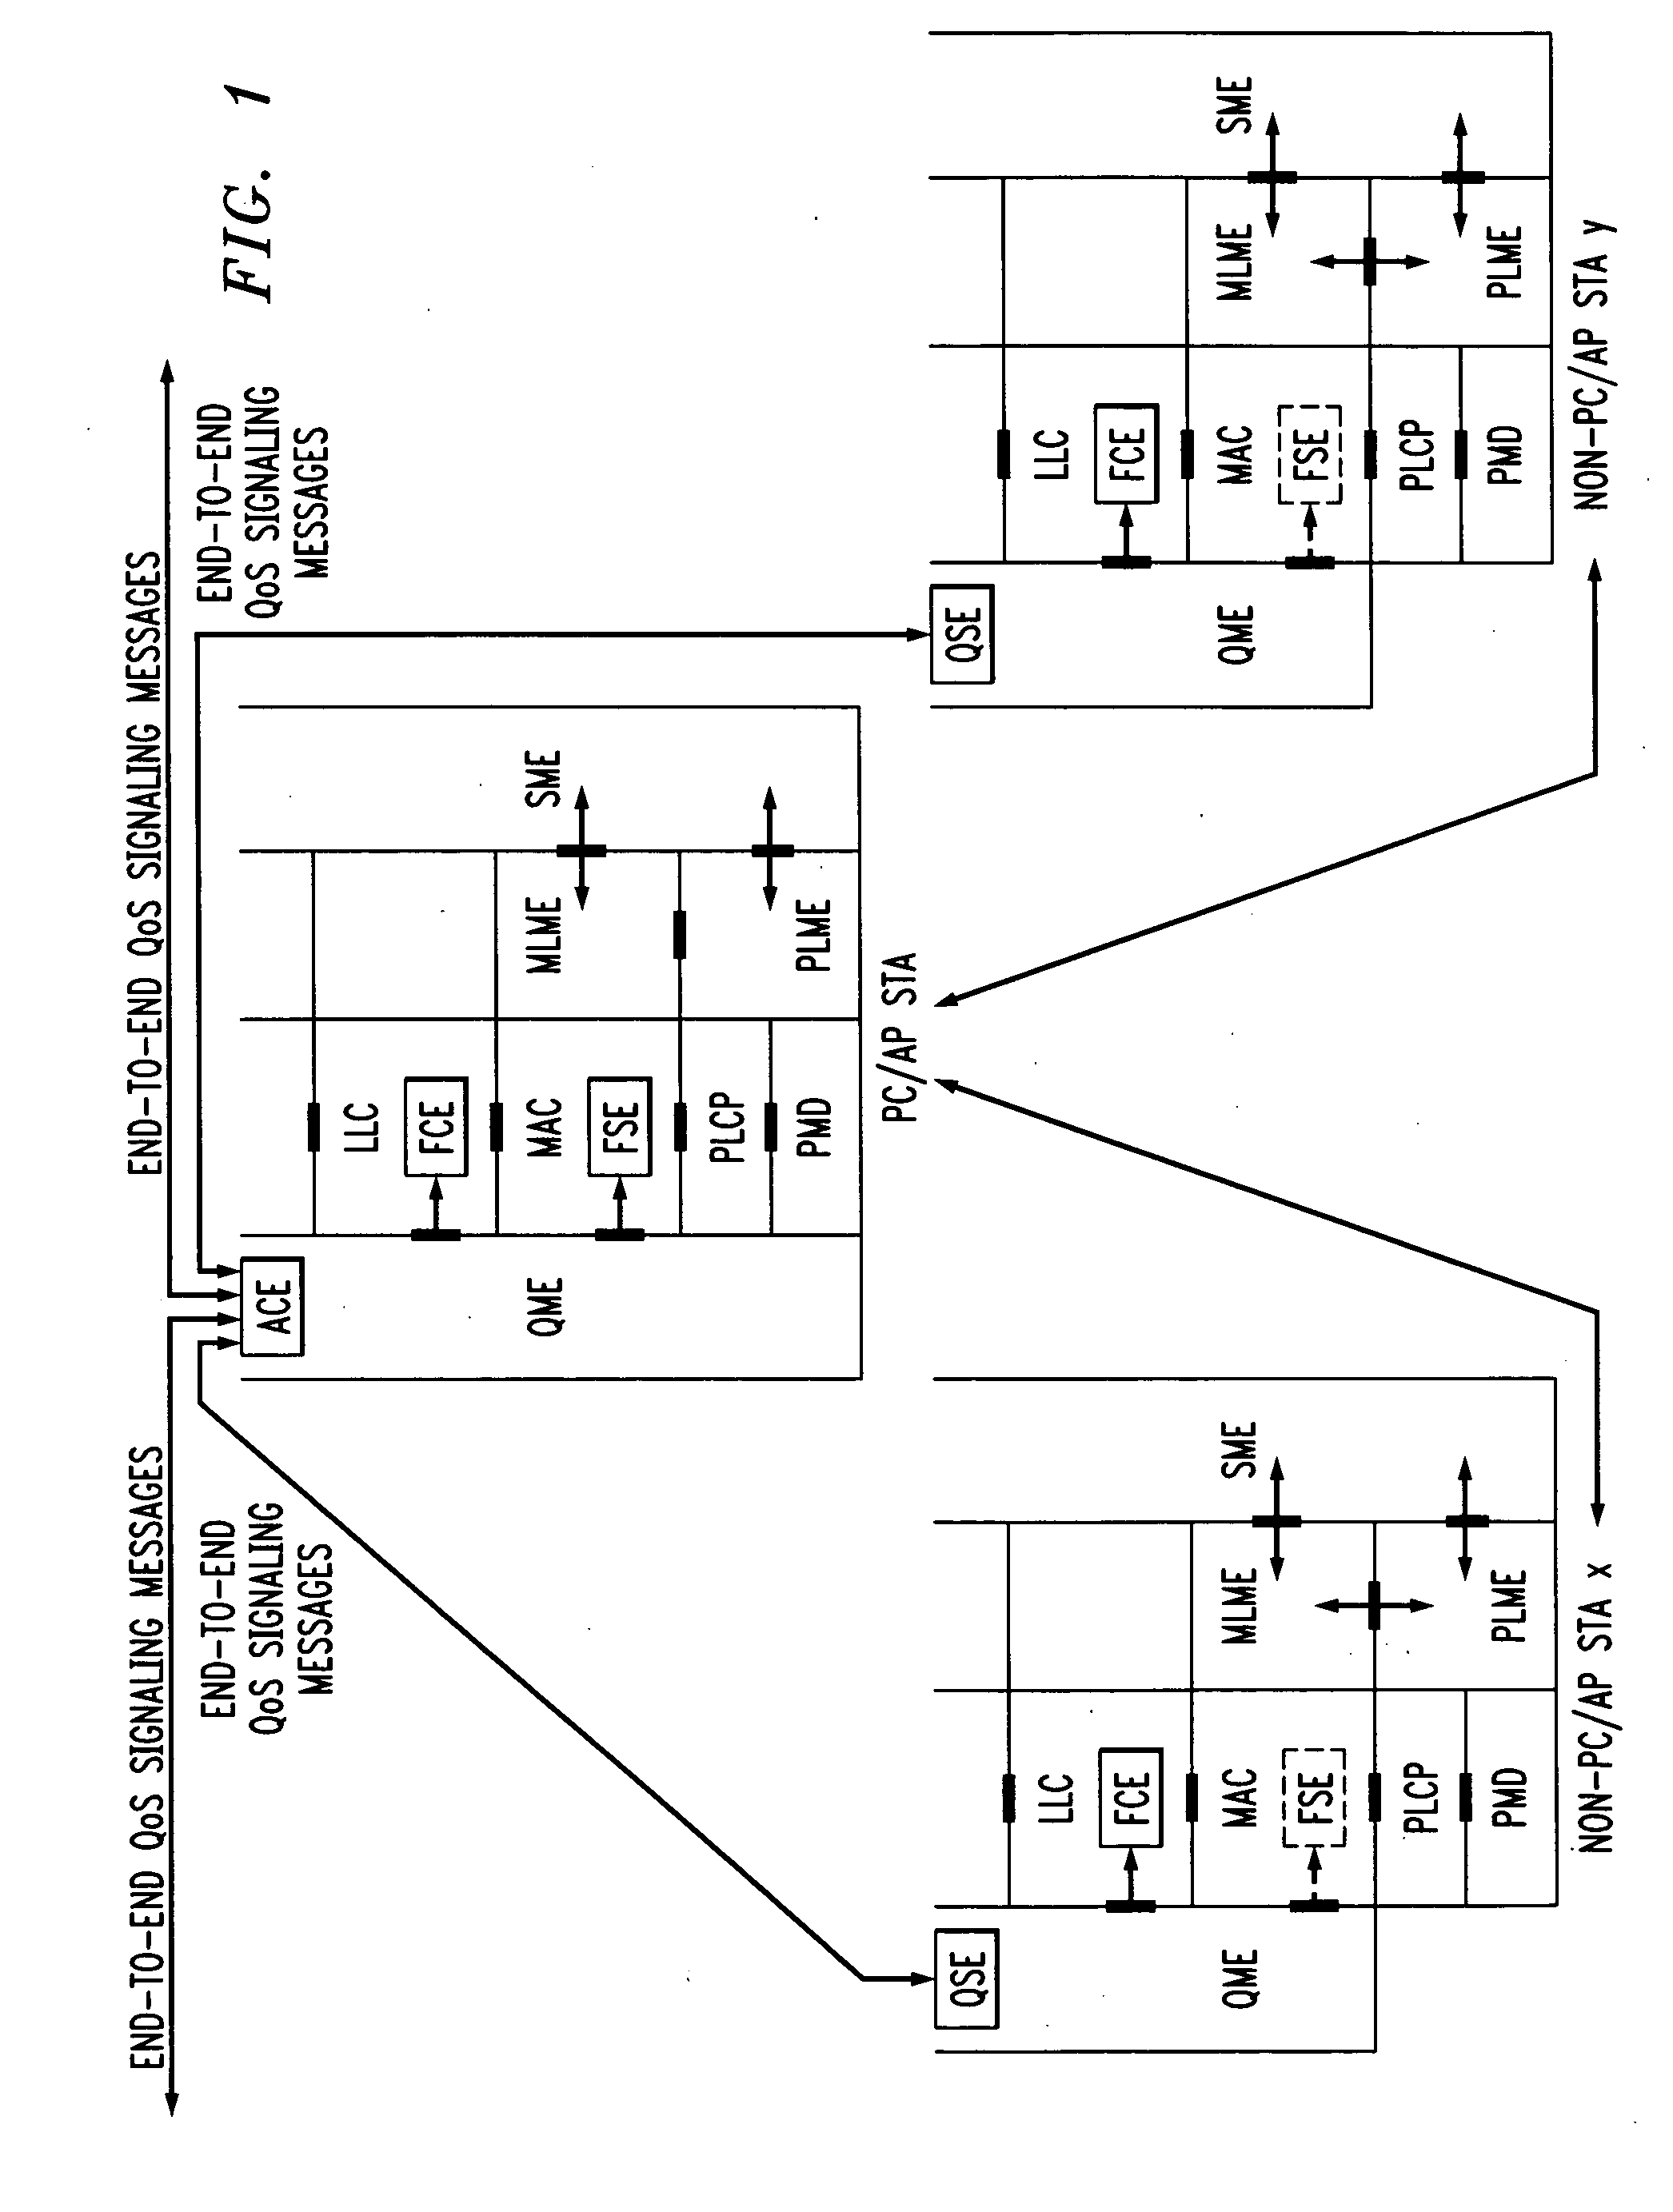 In-band QoS signaling refernce model for QoS-driven wireless lans